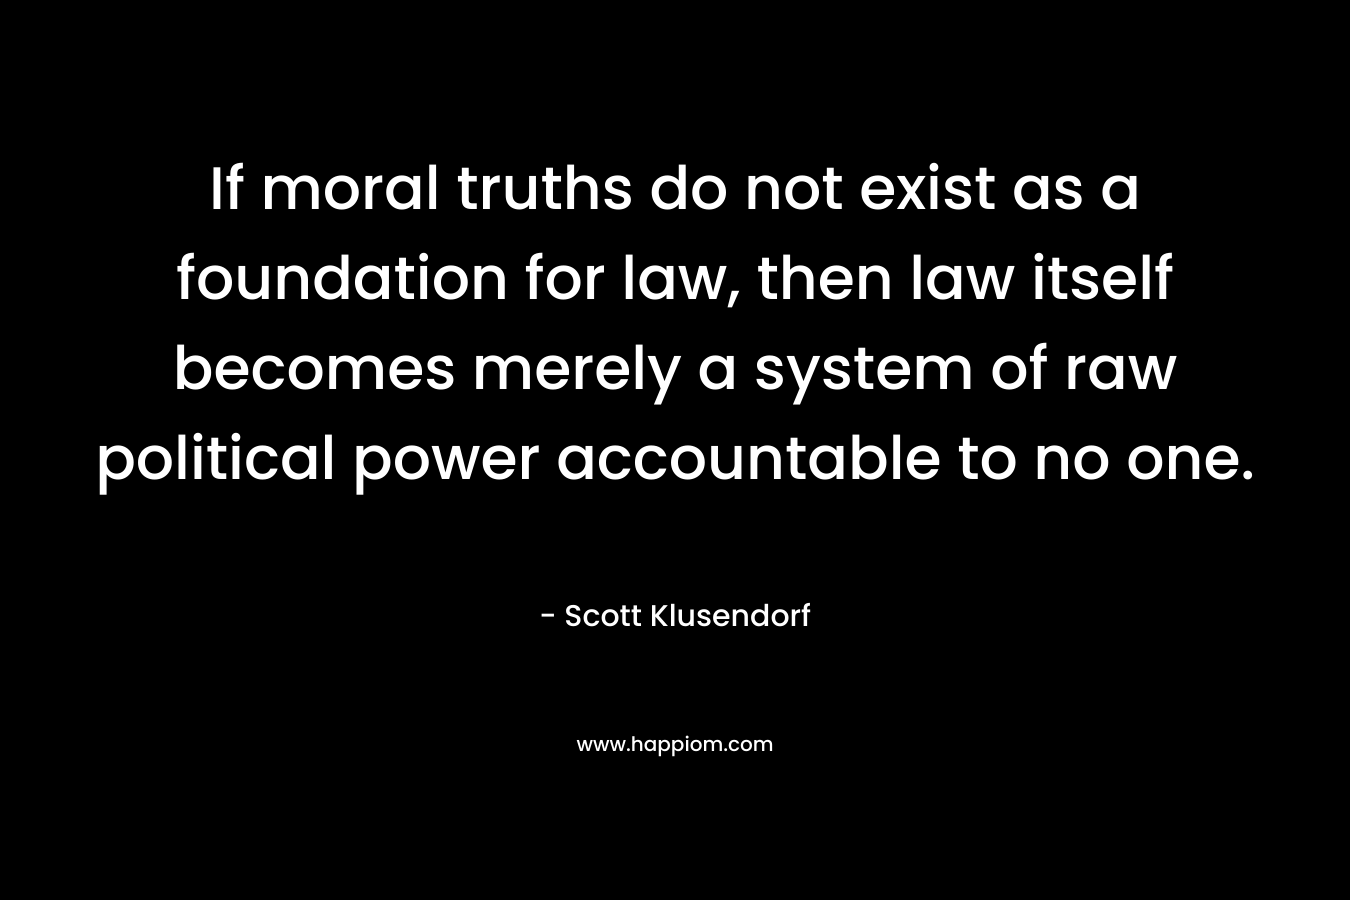 If moral truths do not exist as a foundation for law, then law itself becomes merely a system of raw political power accountable to no one.